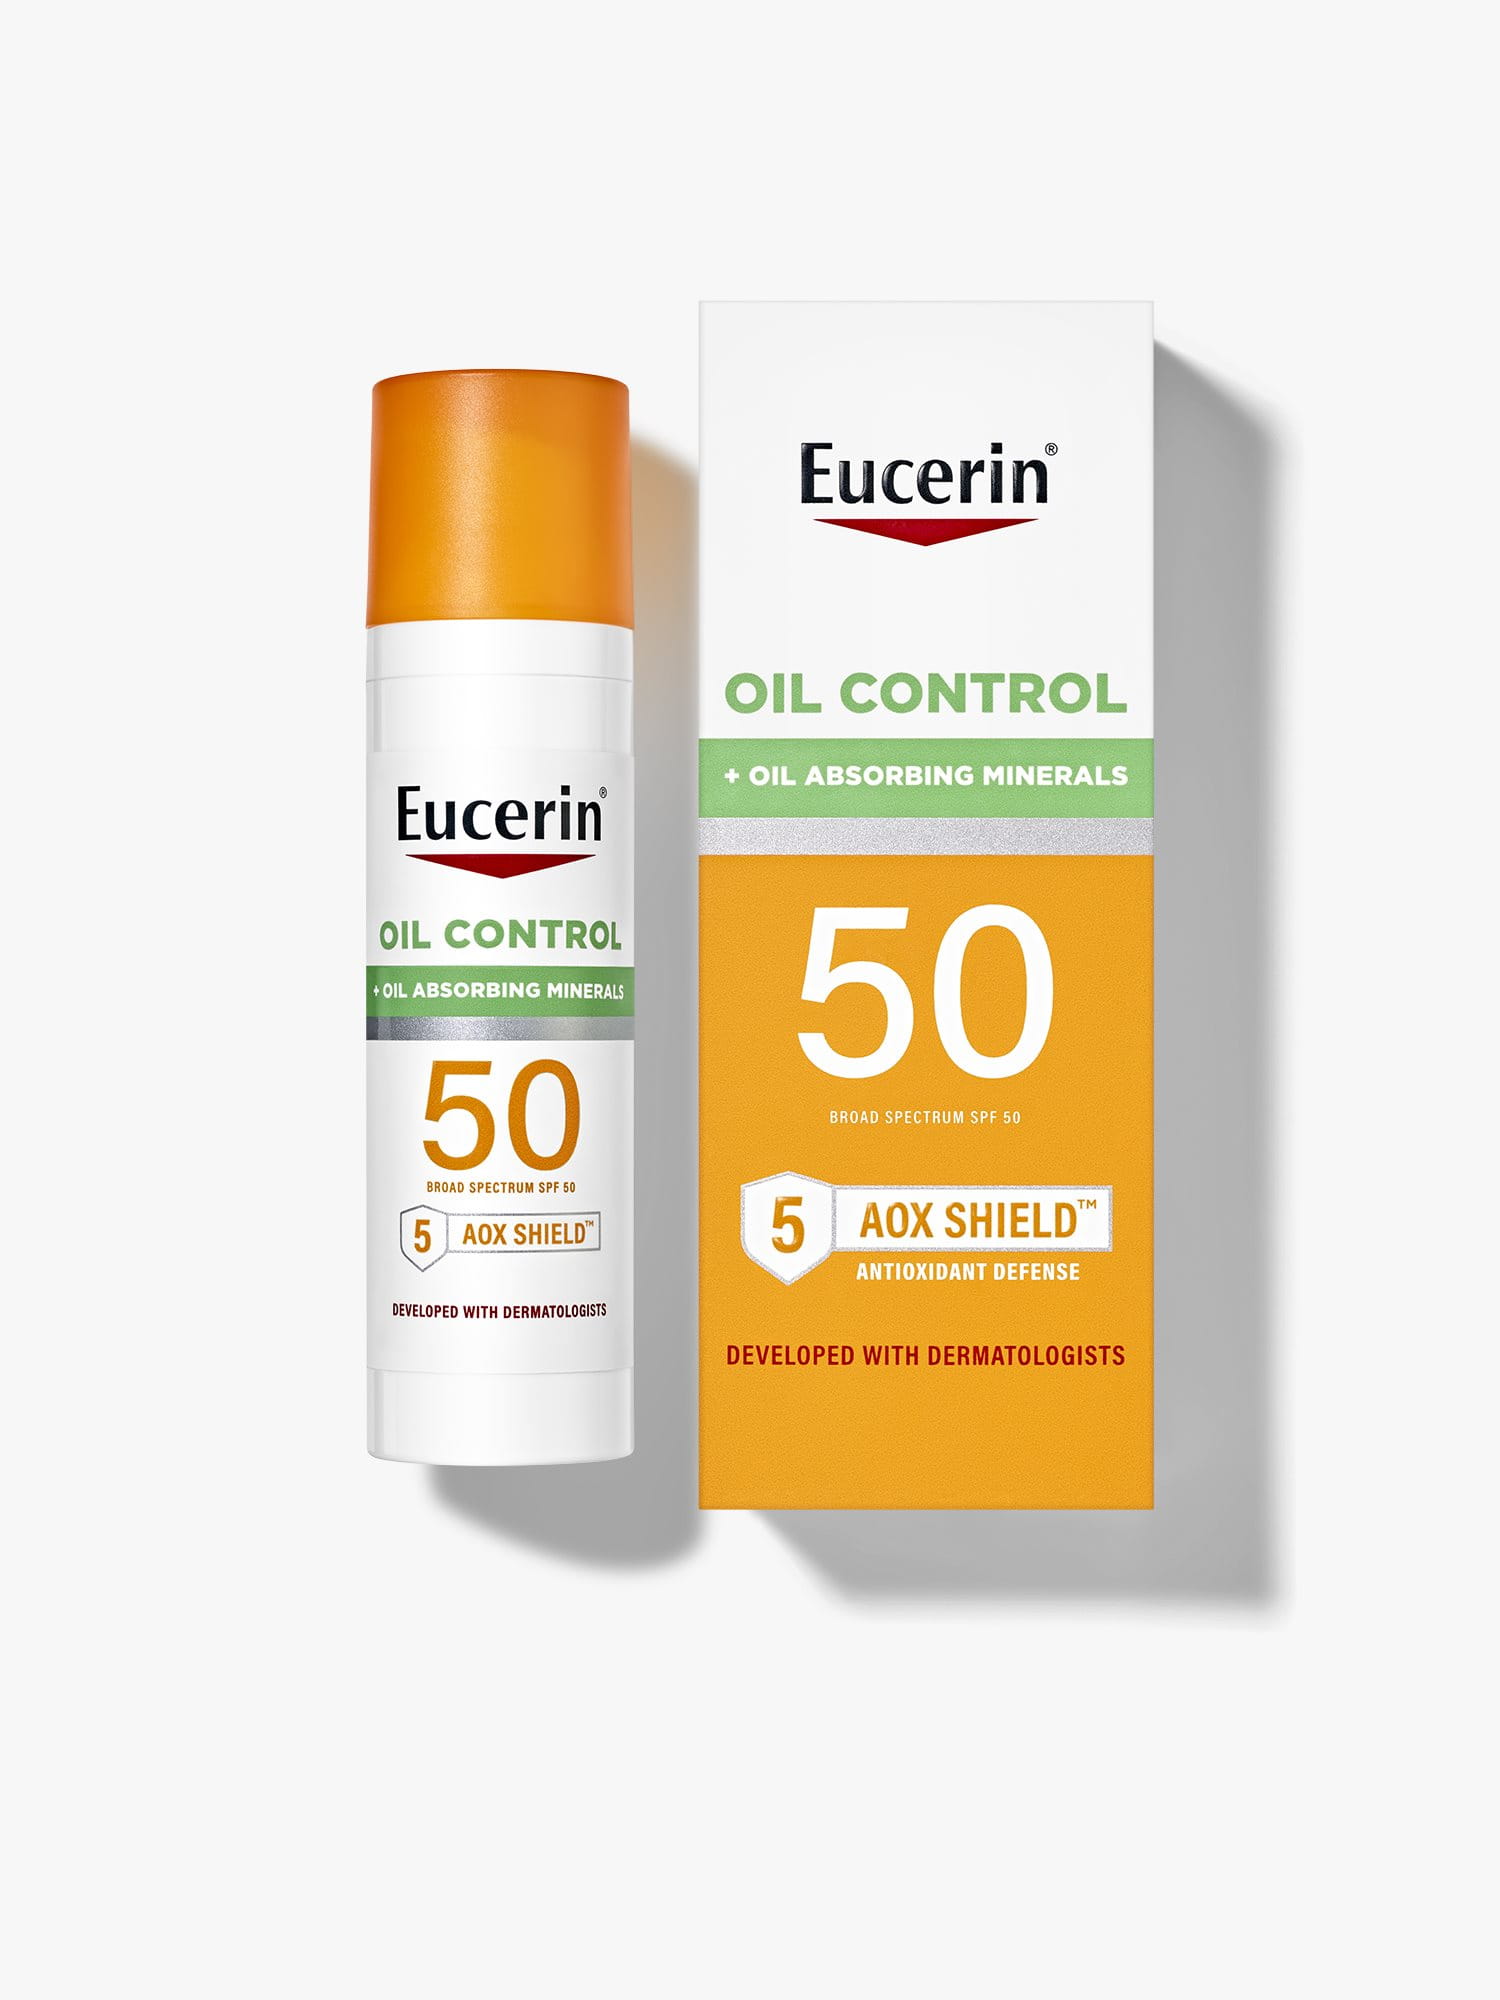 EUCERIN Oil Control Sunscreen Face Lotion SPF 50 0.35 oz sample size From  Derm